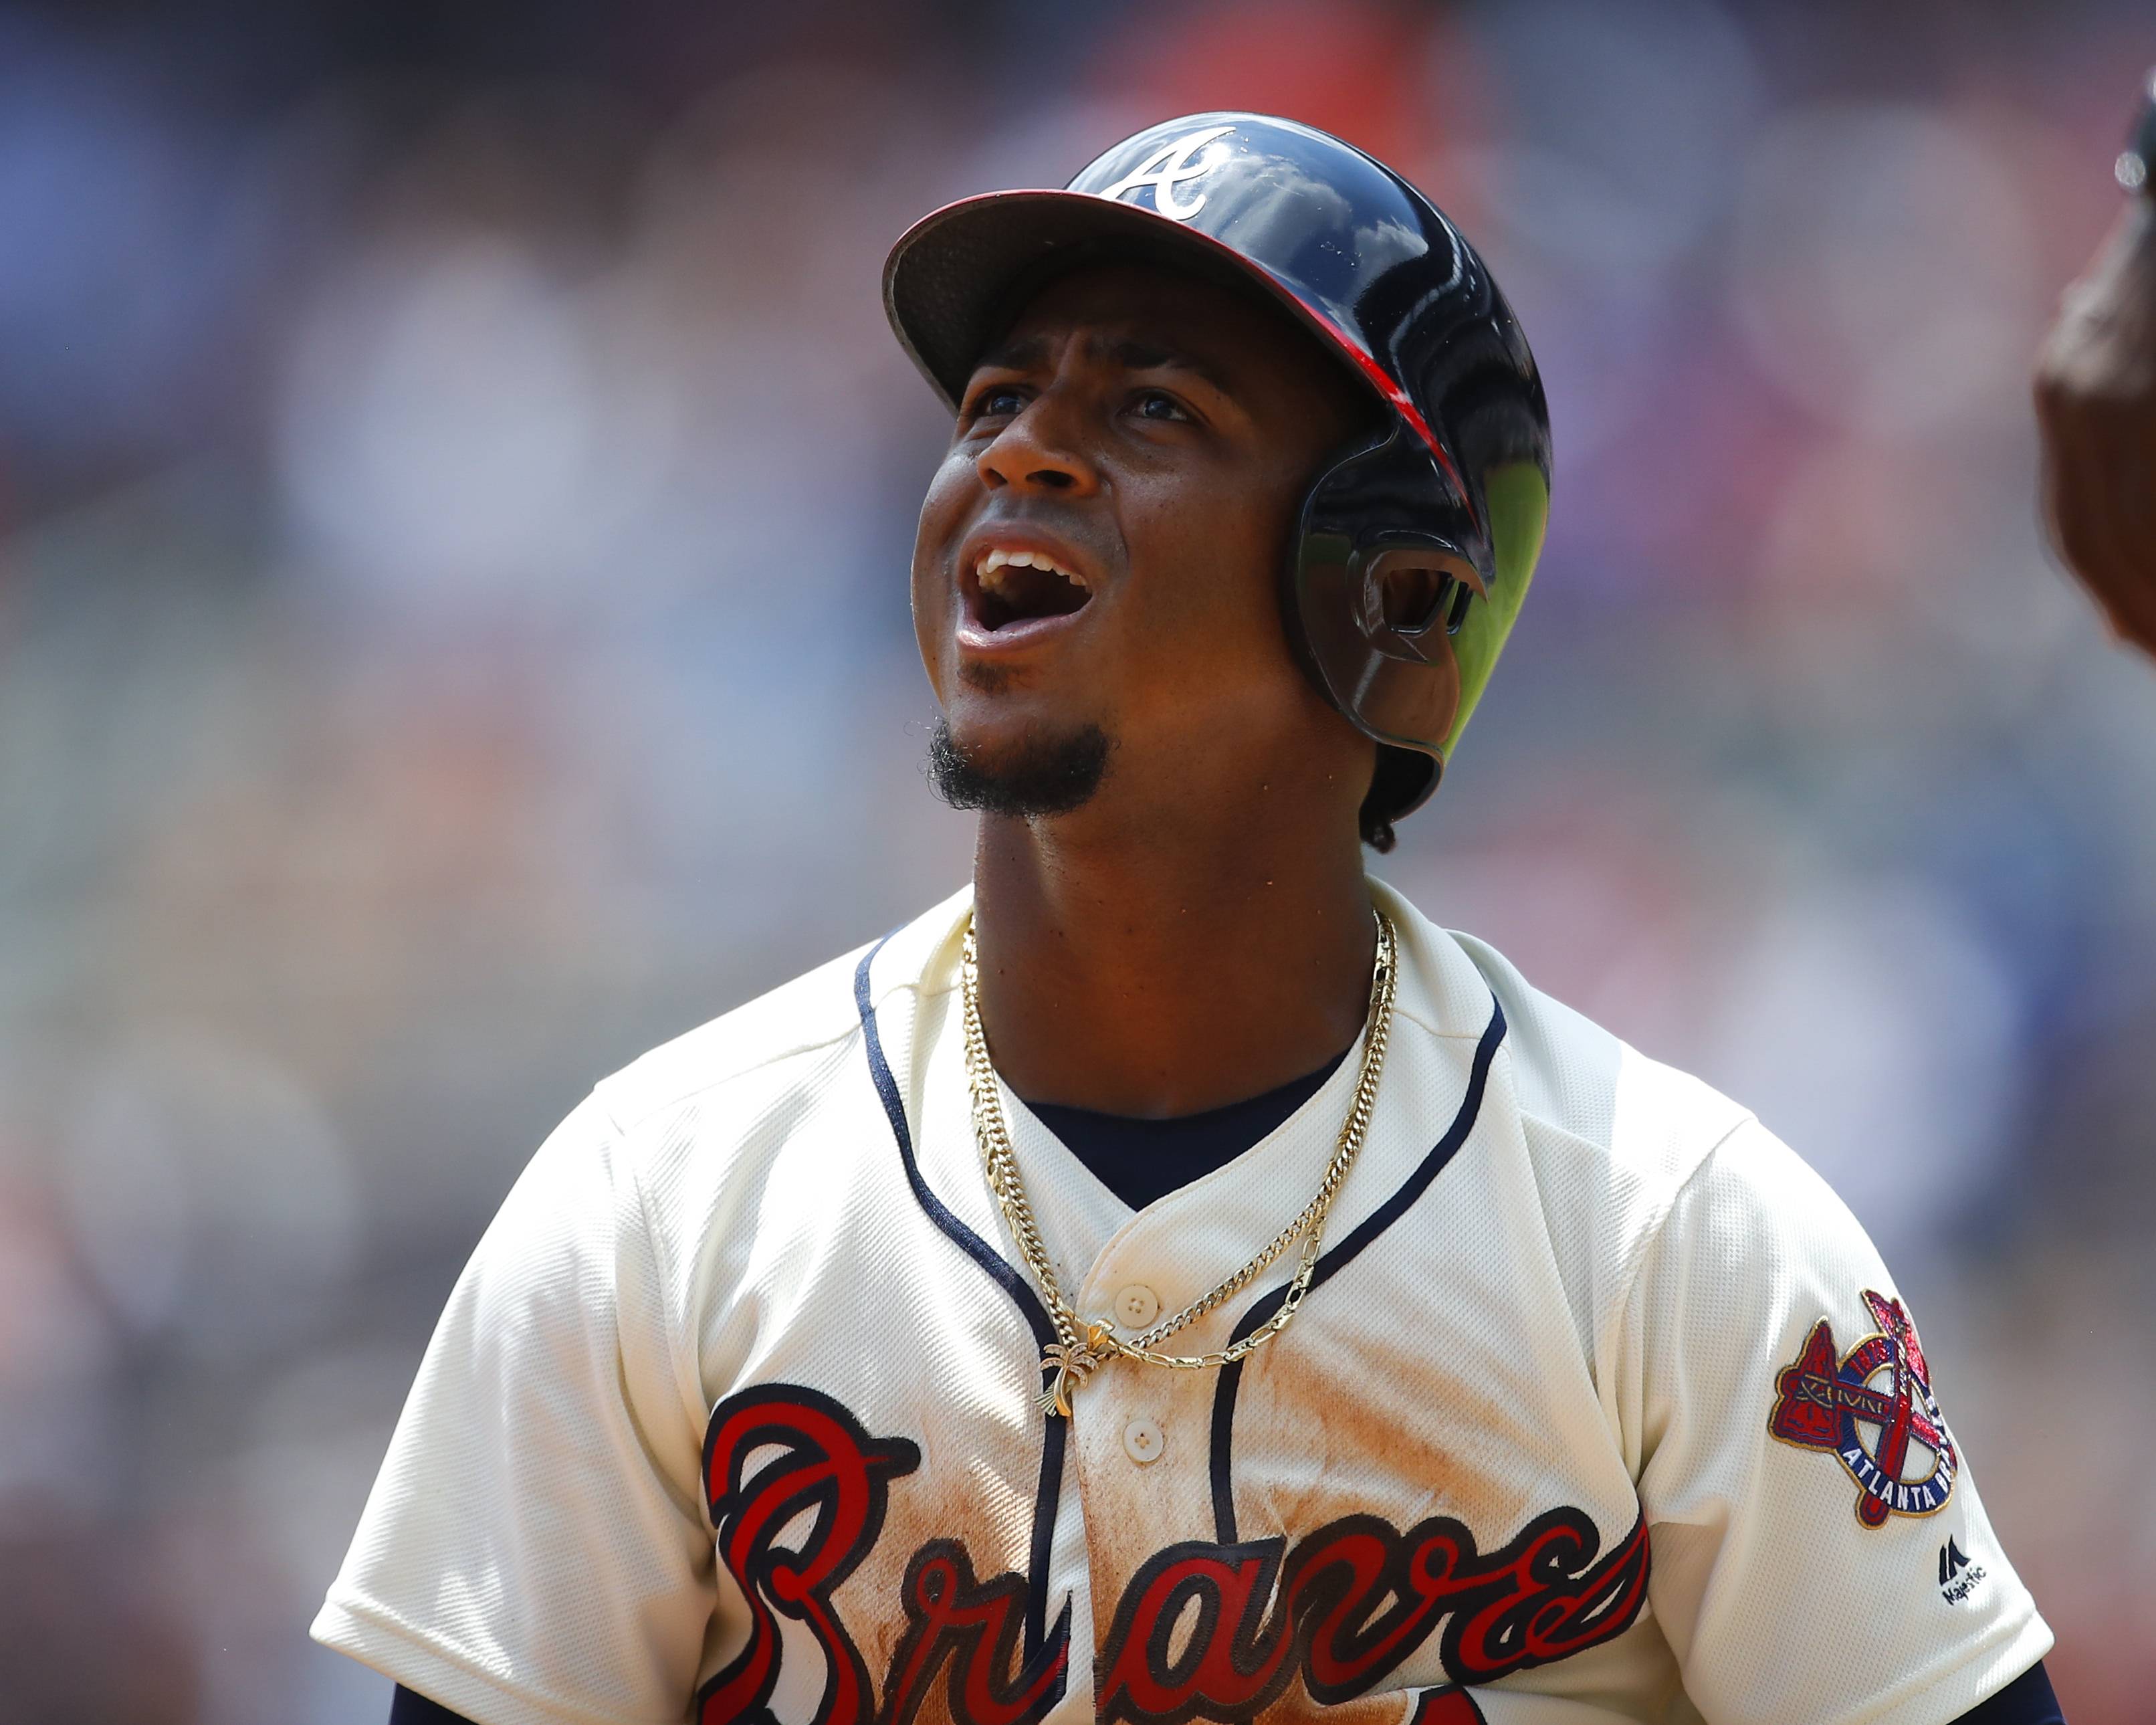 The Truth Behind That Viral Video of Ozzie Albies Embracing Ronald Acuña  Hit With Homophobic Jokes, News